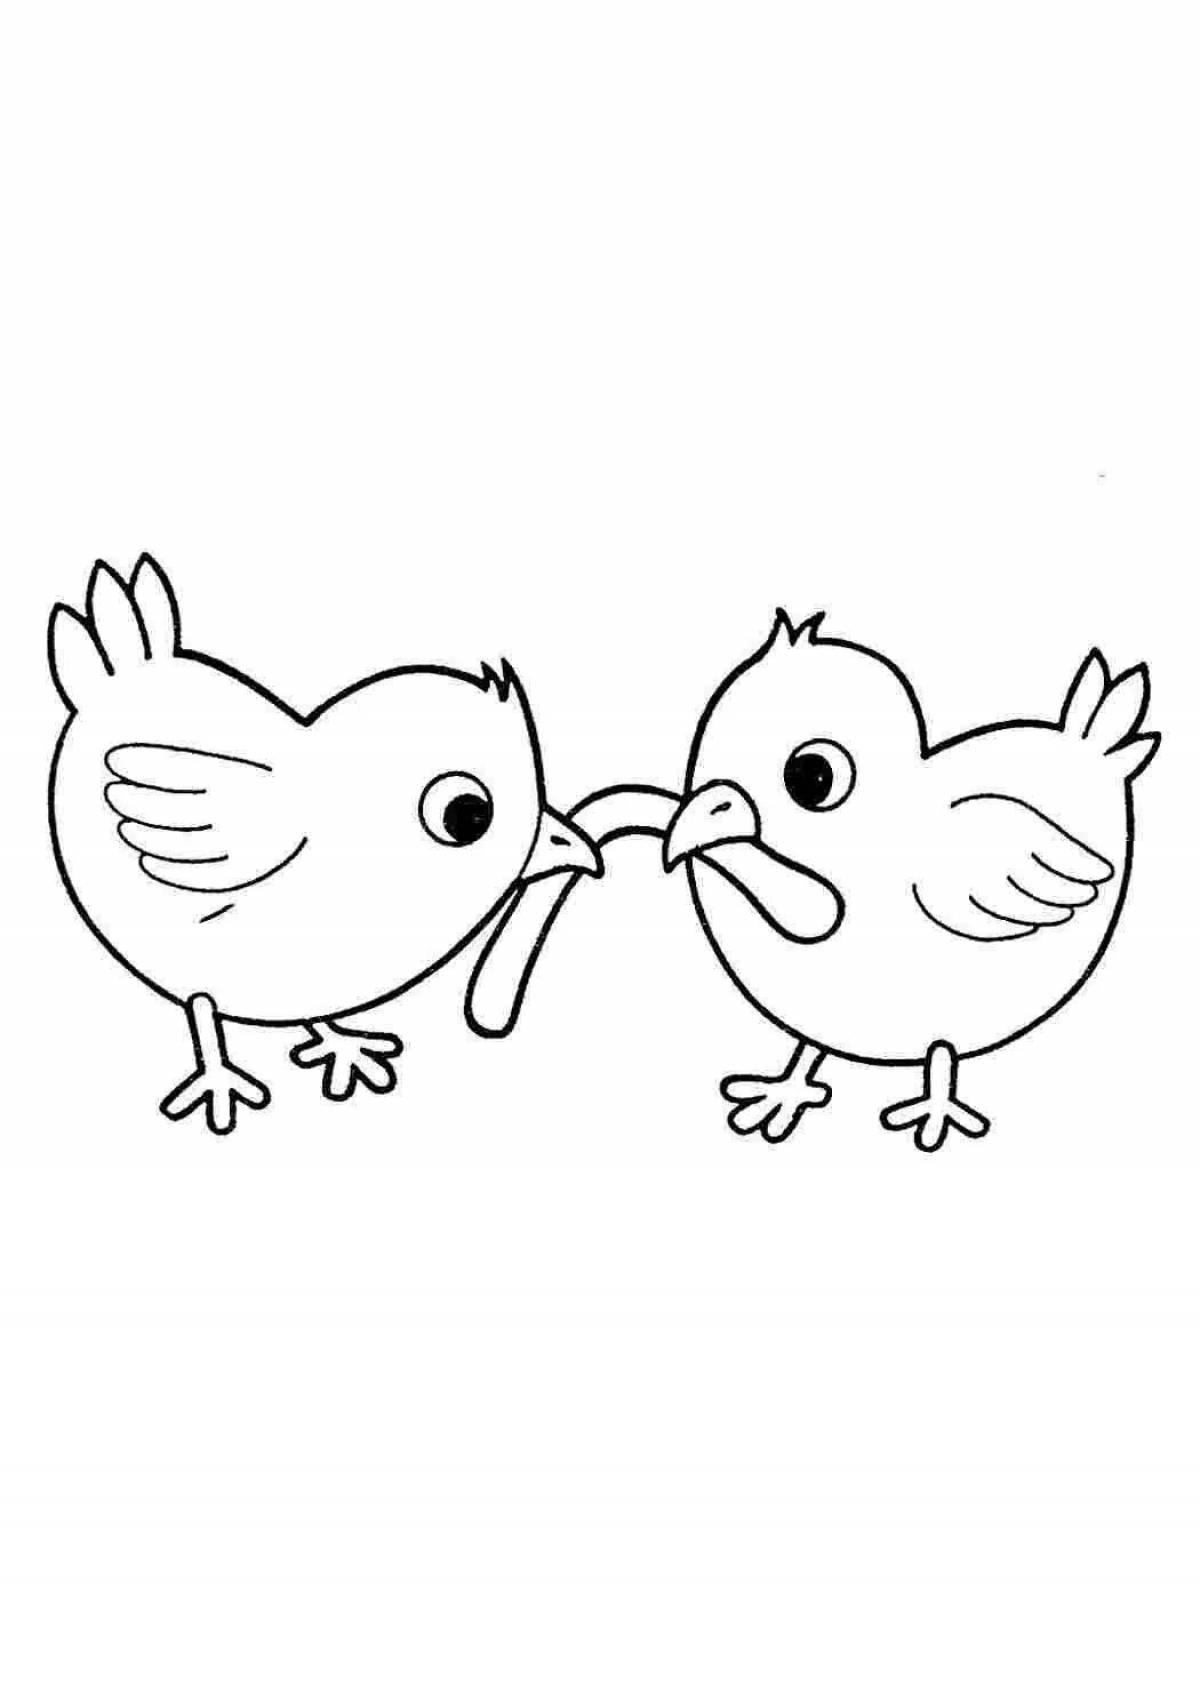 Fun coloring pages with chickens for kids 6-7 years old